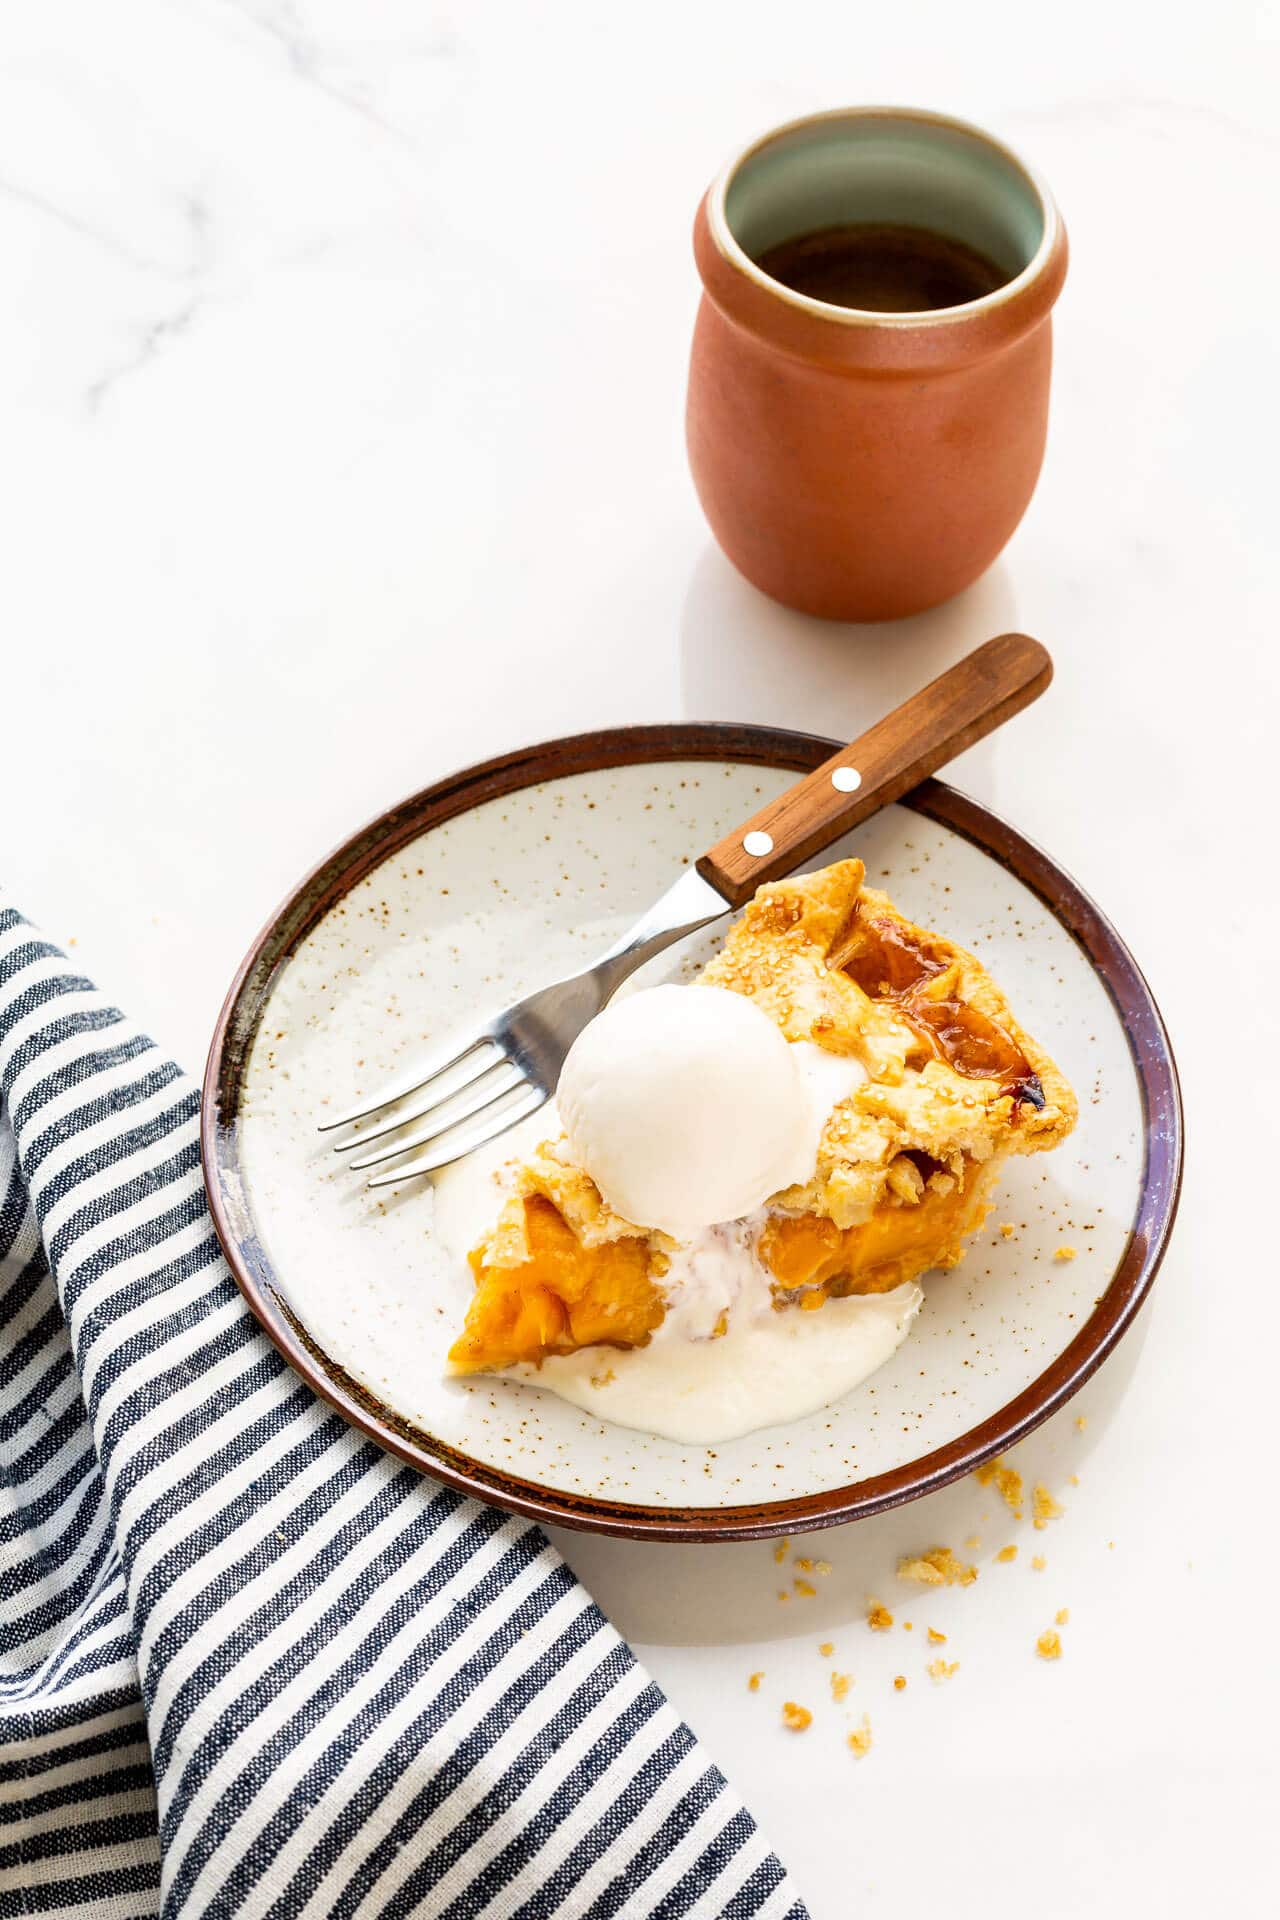 A slice of peach mango pie served à la mode with vanilla ice cream on a ceramic plate with a wood-handled fork and a cup of coffee, blue white striped linen